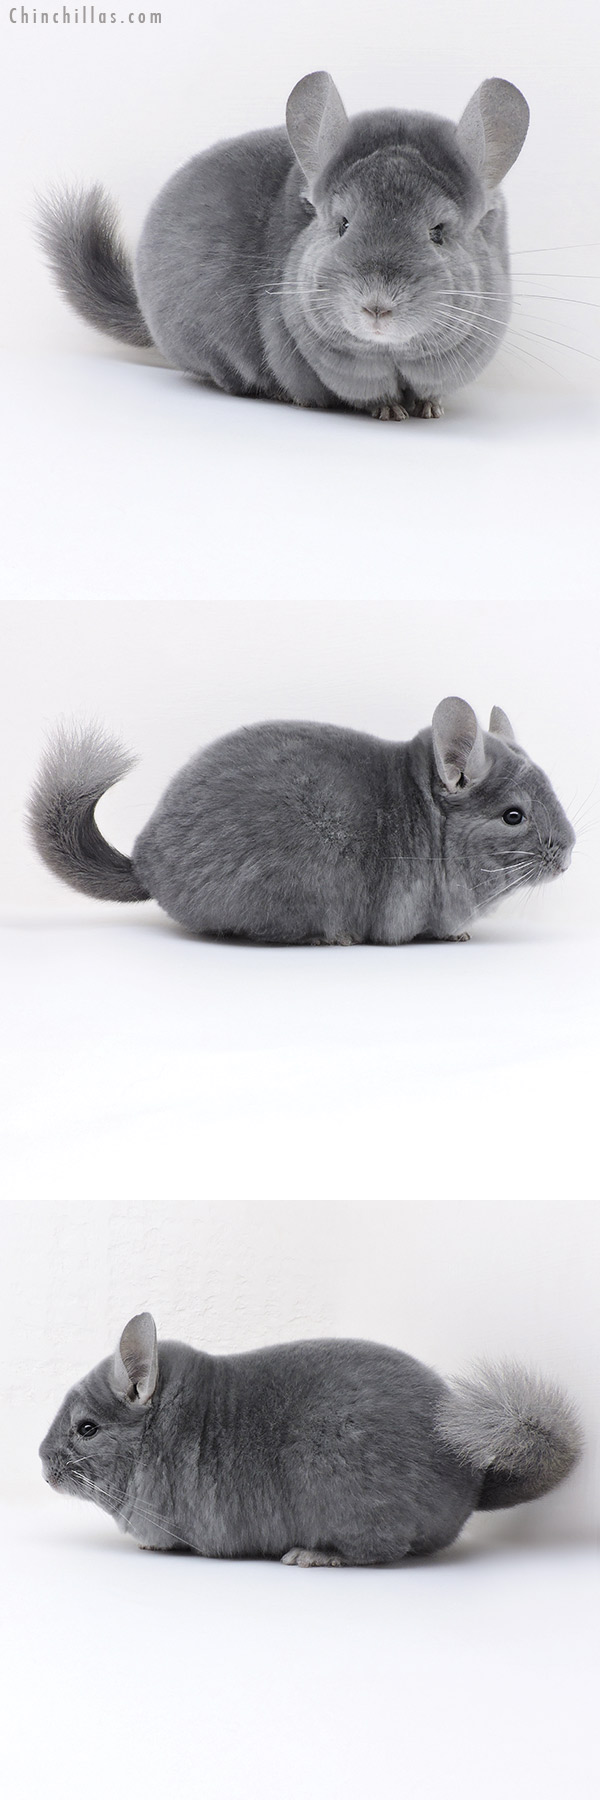 Chinchilla or related item offered for sale or export on Chinchillas.com - 18016 Premium Production Quality Wrap Around Blue Diamond Female Chinchilla